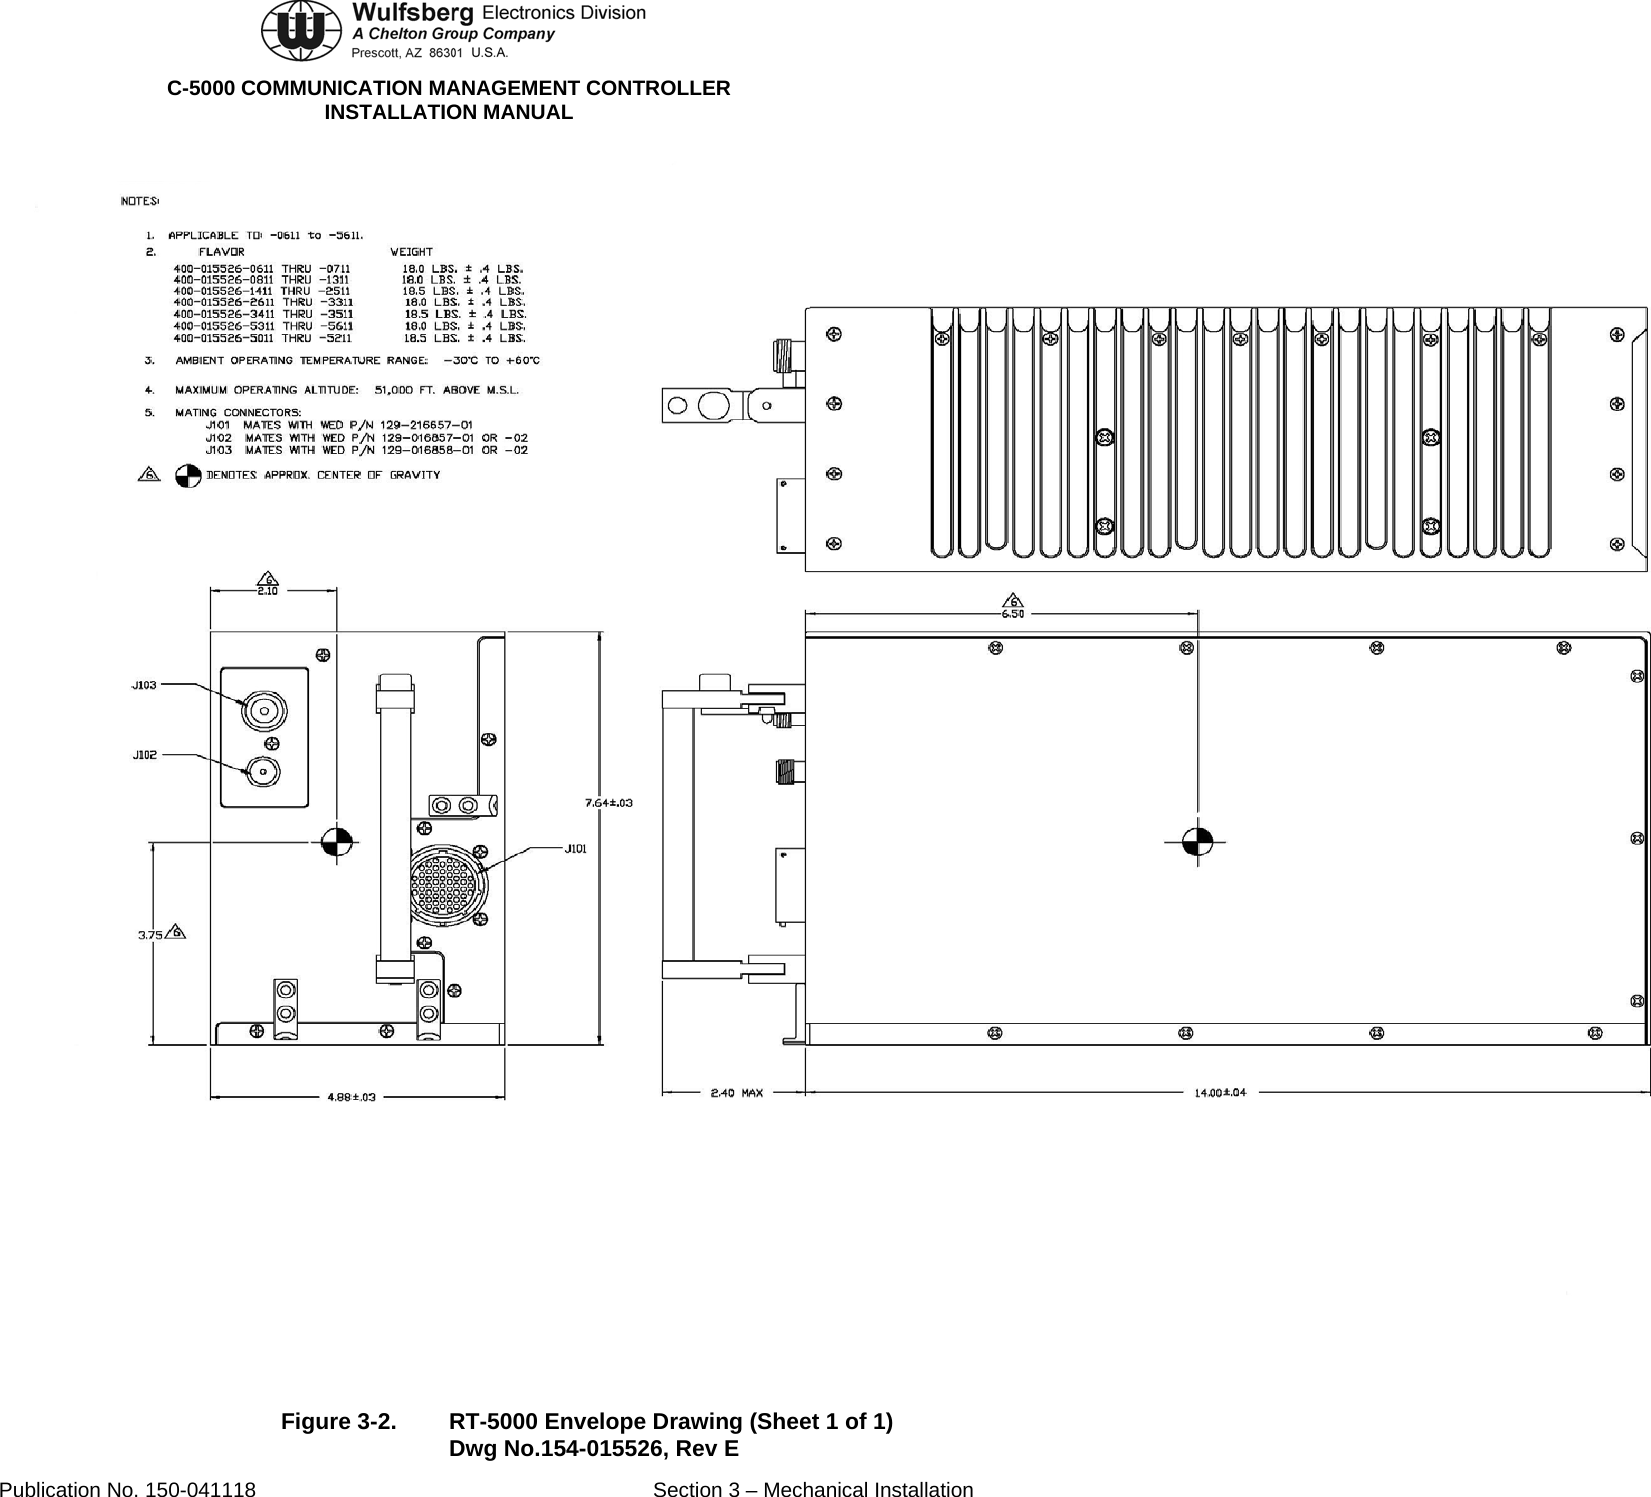  C-5000 COMMUNICATION MANAGEMENT CONTROLLER INSTALLATION MANUAL   Figure 3-2.  RT-5000 Envelope Drawing (Sheet 1 of 1) Dwg No.154-015526, Rev E Publication No. 150-041118  Section 3 – Mechanical Installation 